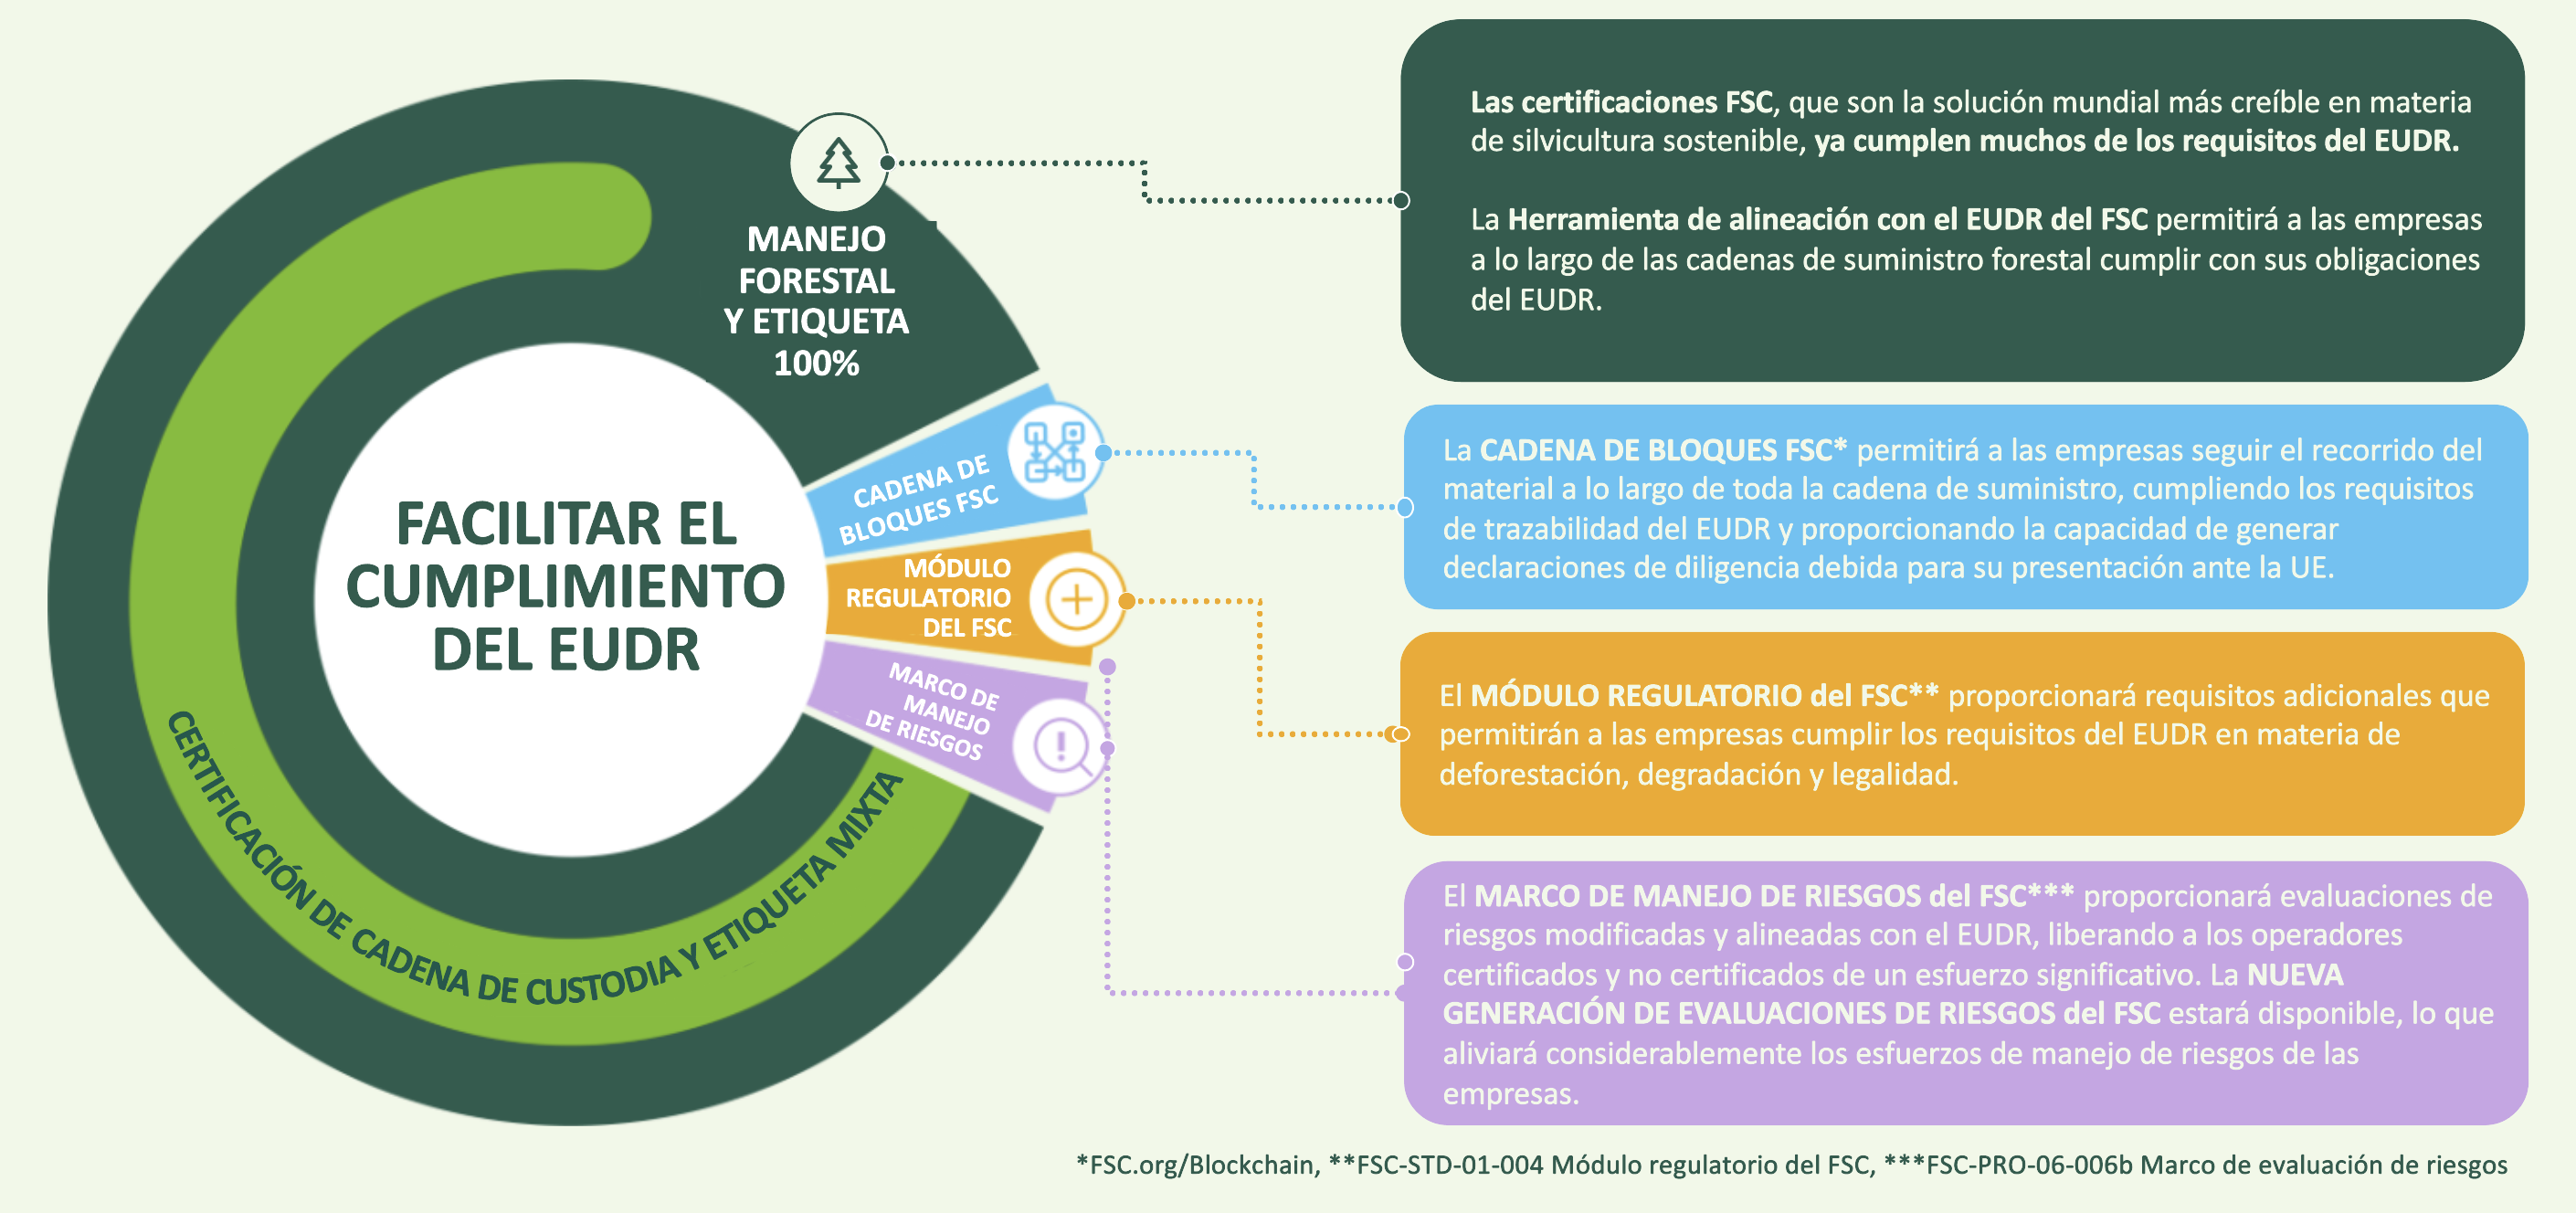 spanish version of enabling eudr compliance chart